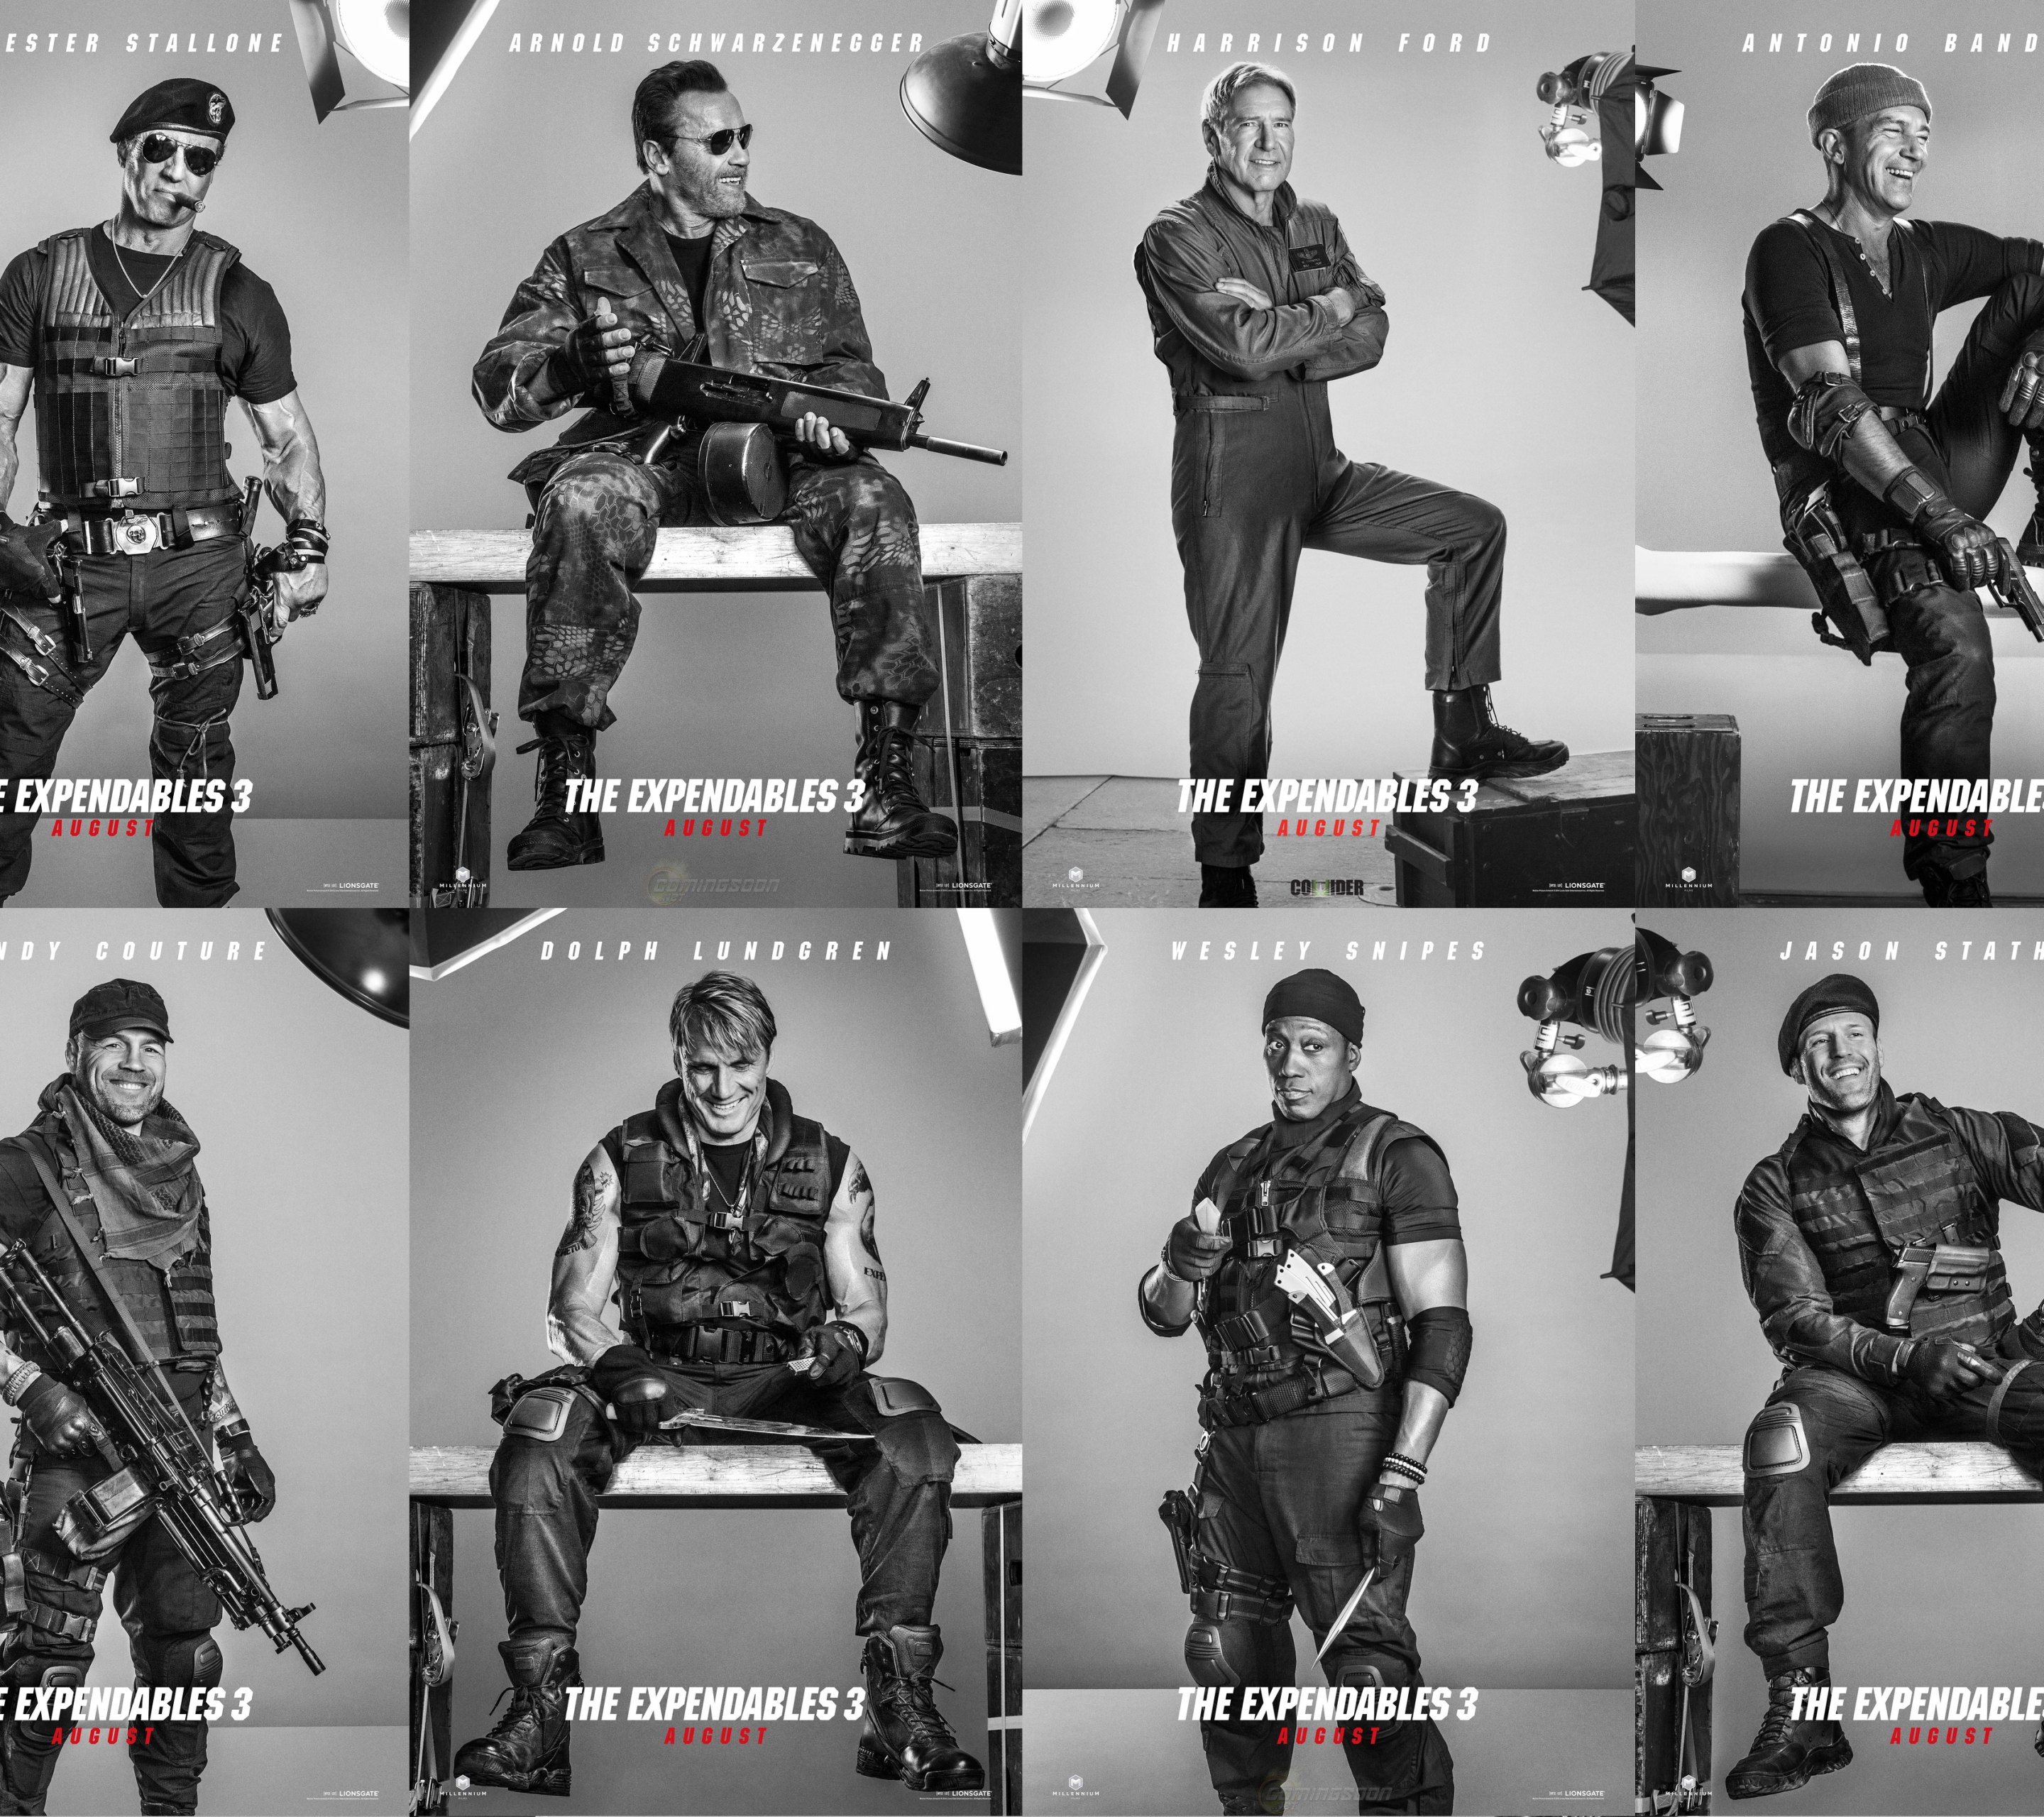 movie, the expendables 3, randy couture, sylvester stallone, arnold schwarzenegger, dolph lundgren, wesley snipes, harrison ford, jason statham, antonio banderas, barney ross, doc (the expendables), trench (the expendables), lee christmas, gunnar jensen, toll road, galgo (the expendables), max drummer, the expendables Smartphone Background